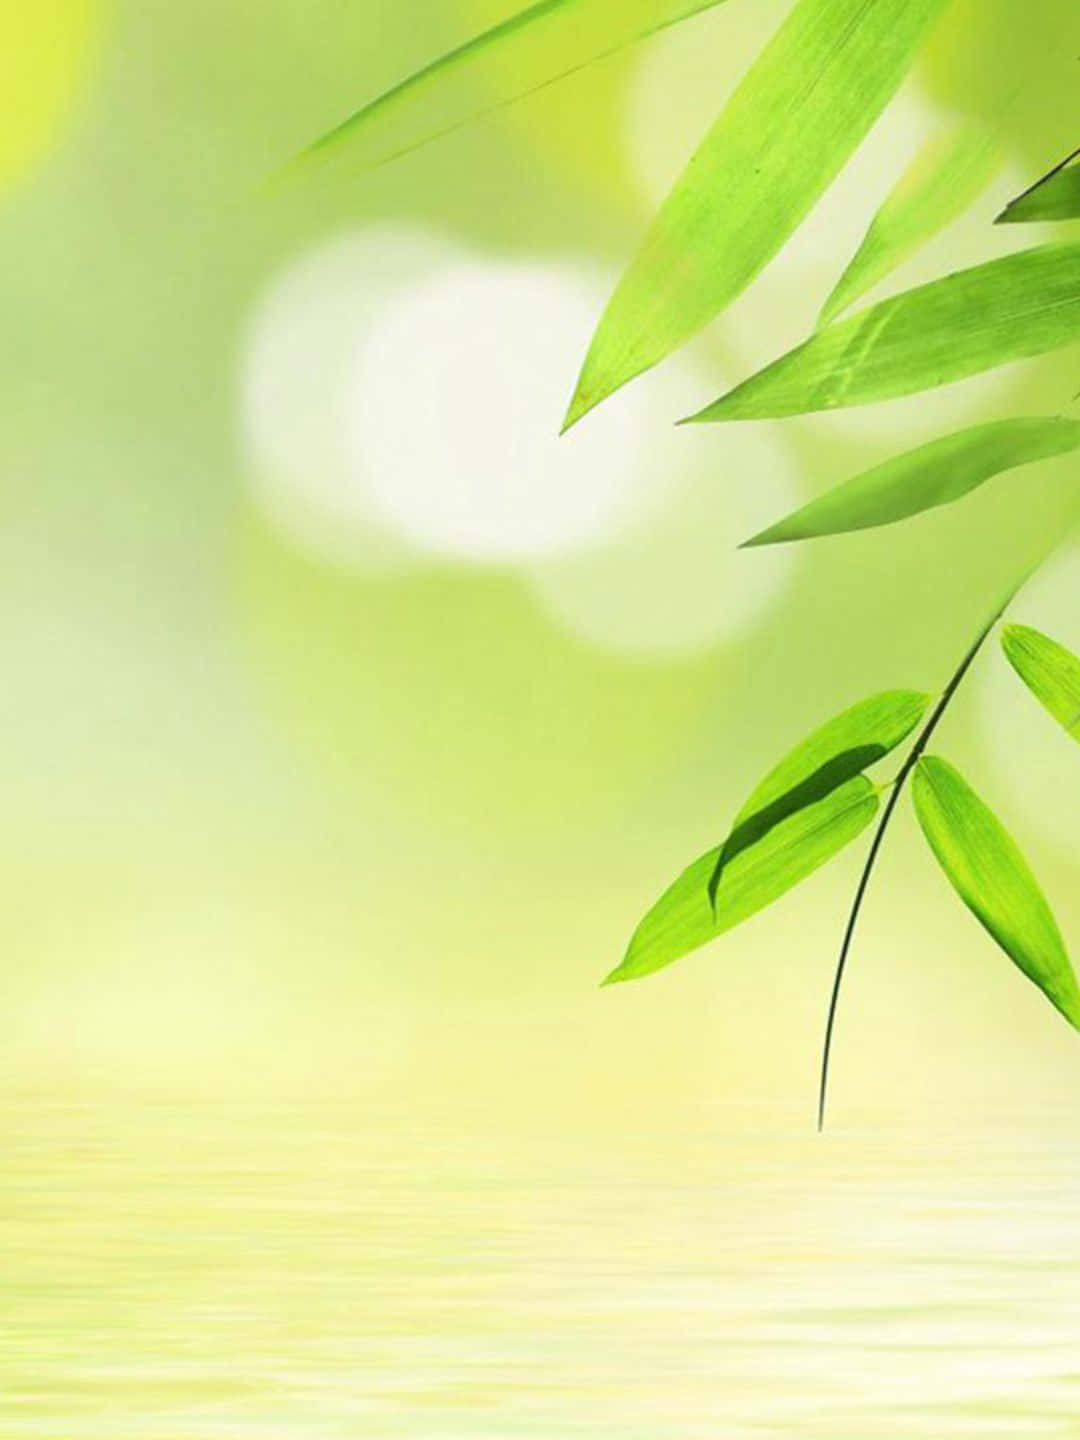 1440p Bamboo Background Leaves With A Bright Backdrop